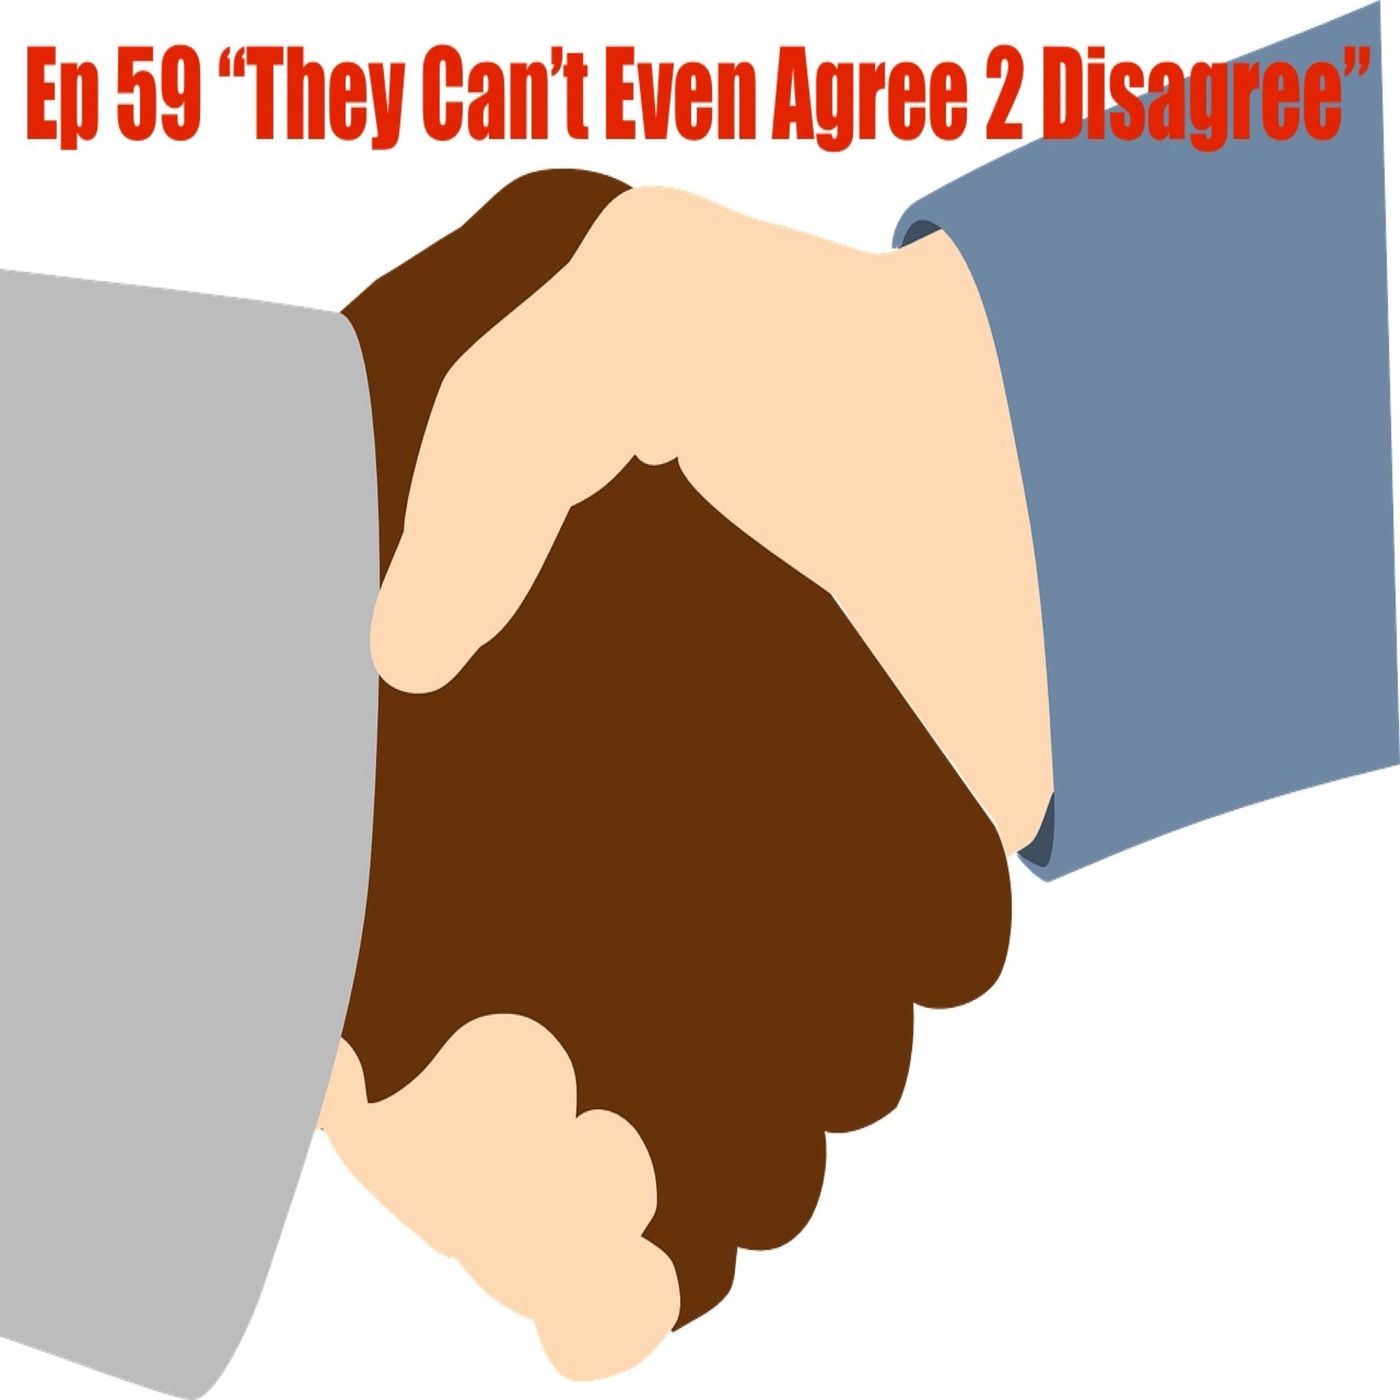 Ep 59 "They Can't Even Agree 2 Disagree"